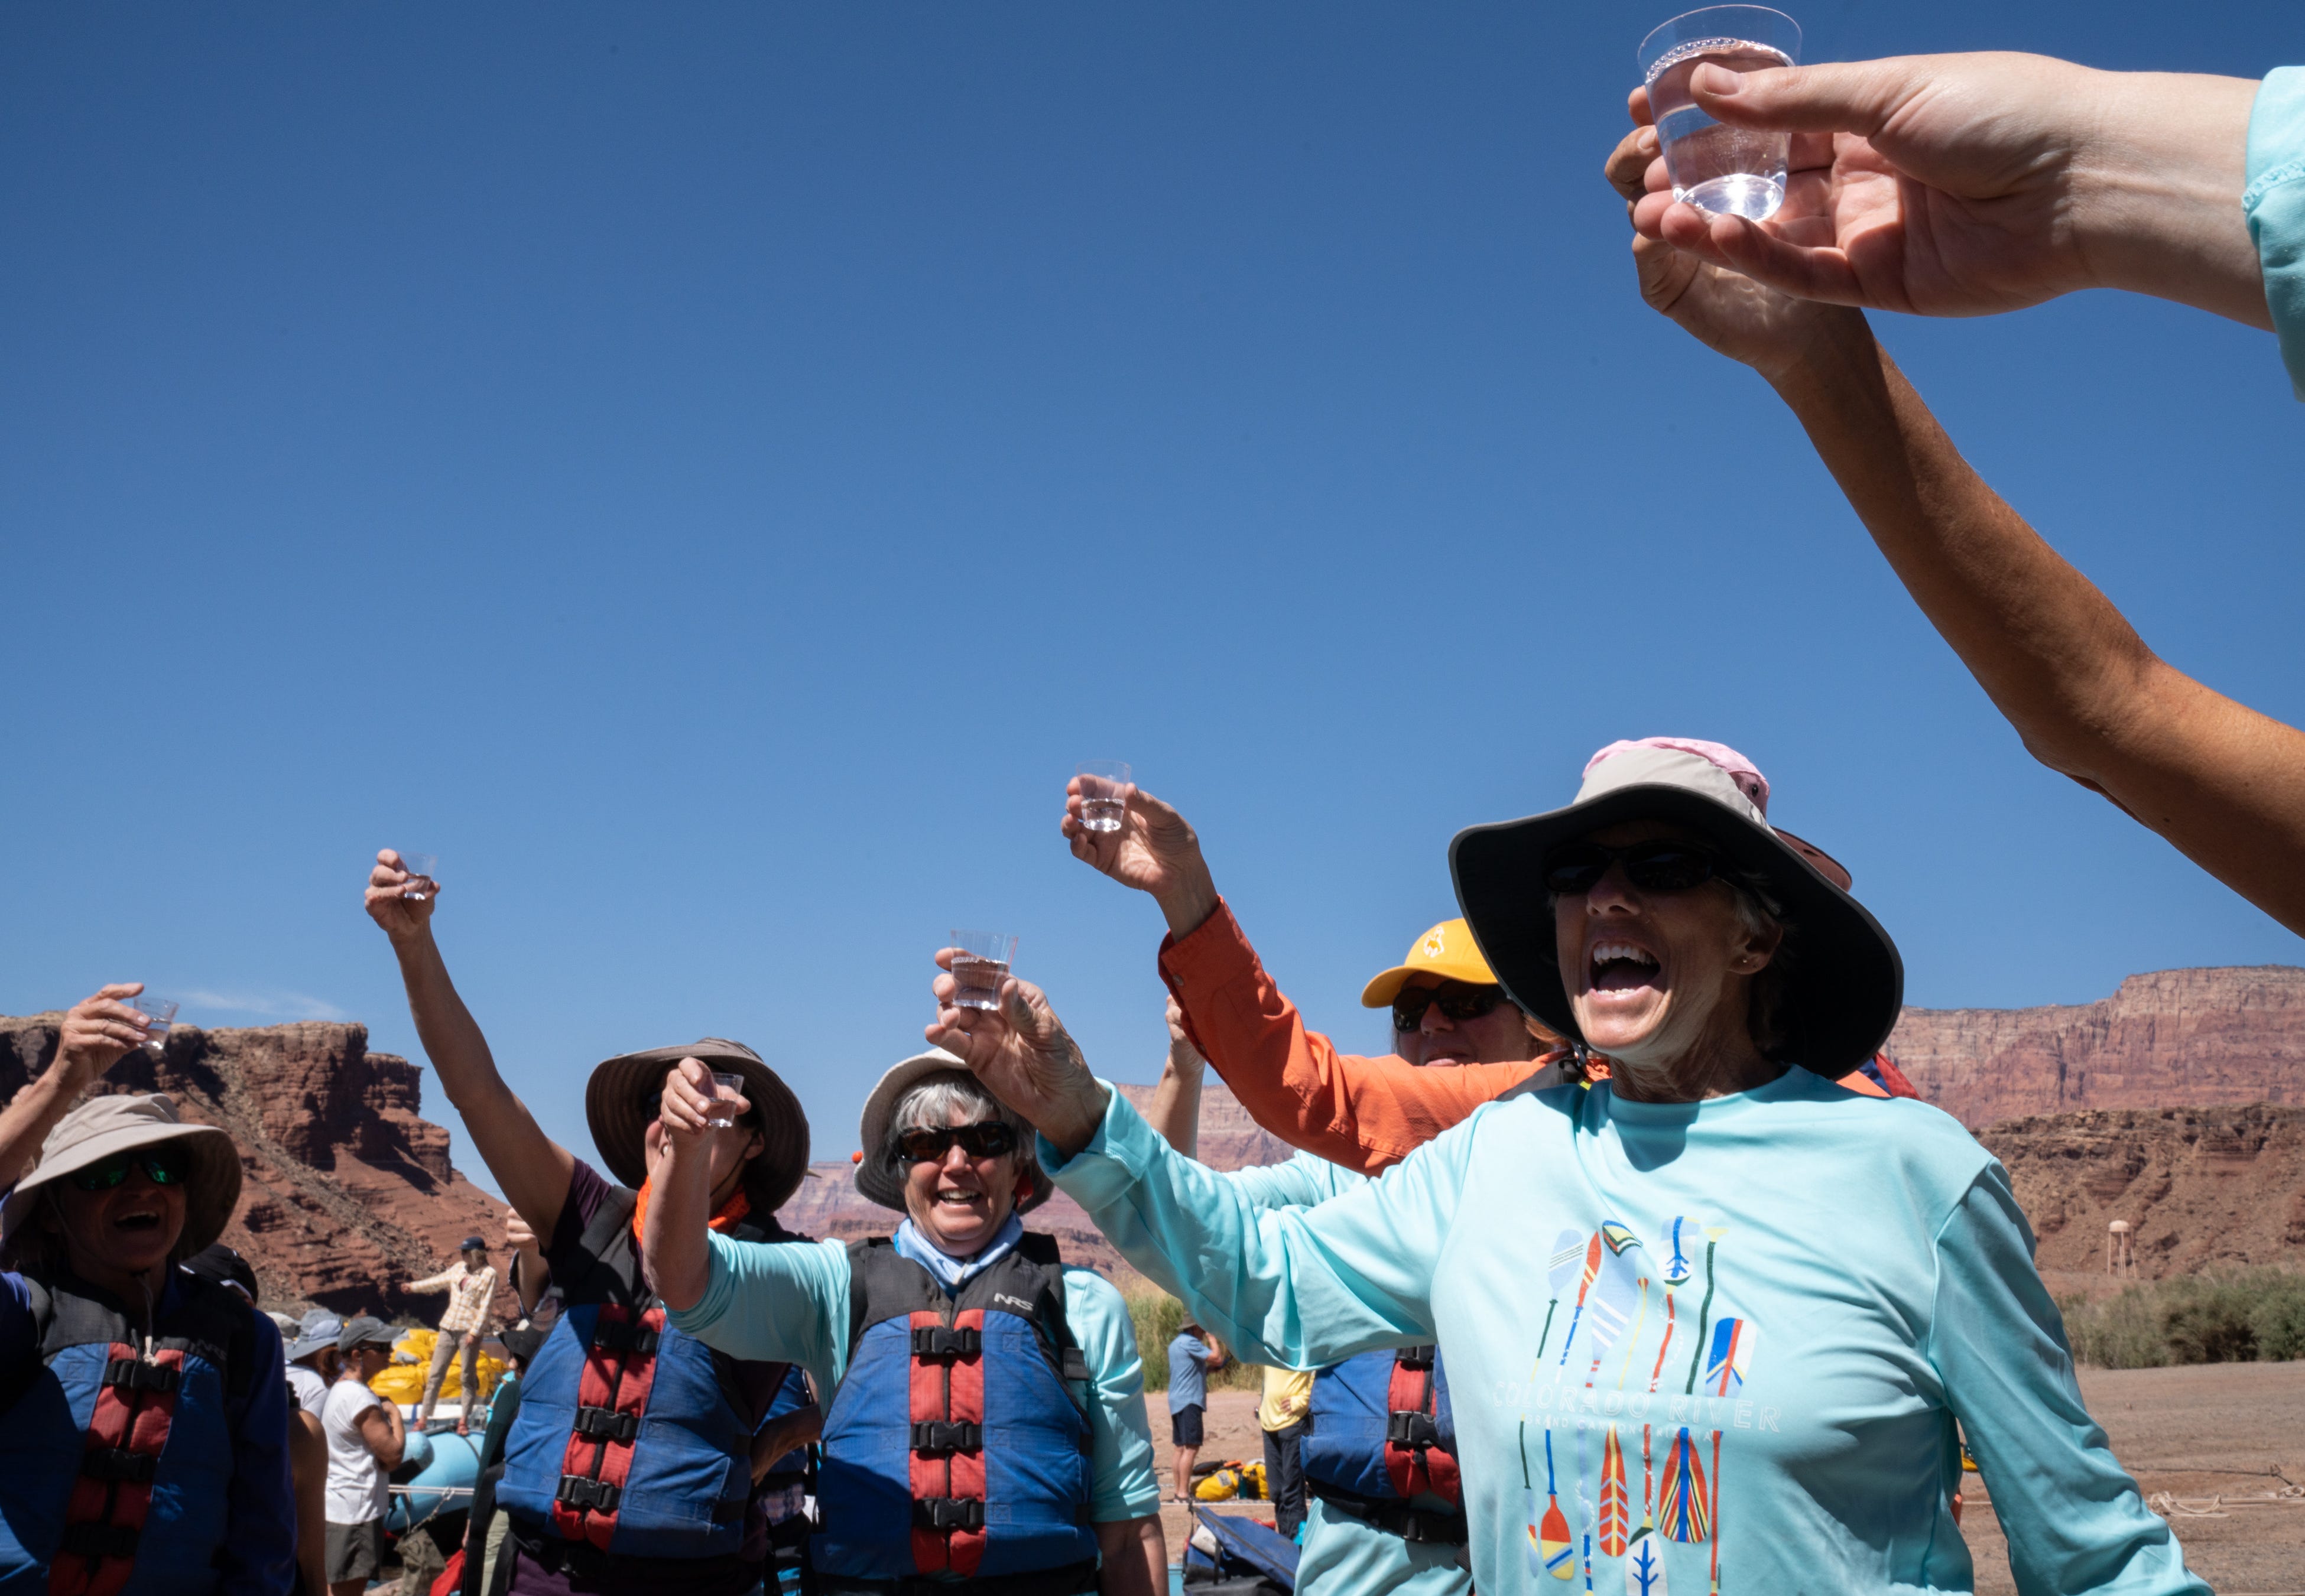 Jar Mortenson, right, leads a group of rafters from Wyoming toast their journey before they start an eight-day trip down the Colorado River through Grand Canyon on May 25, 2022, at Lees Ferry in the Glen Canyon National Recreation Area. Some of the friends fear climate change will permanently challenge their state’s water supply, but, Mortenson said, “I believe things will correct themselves.”